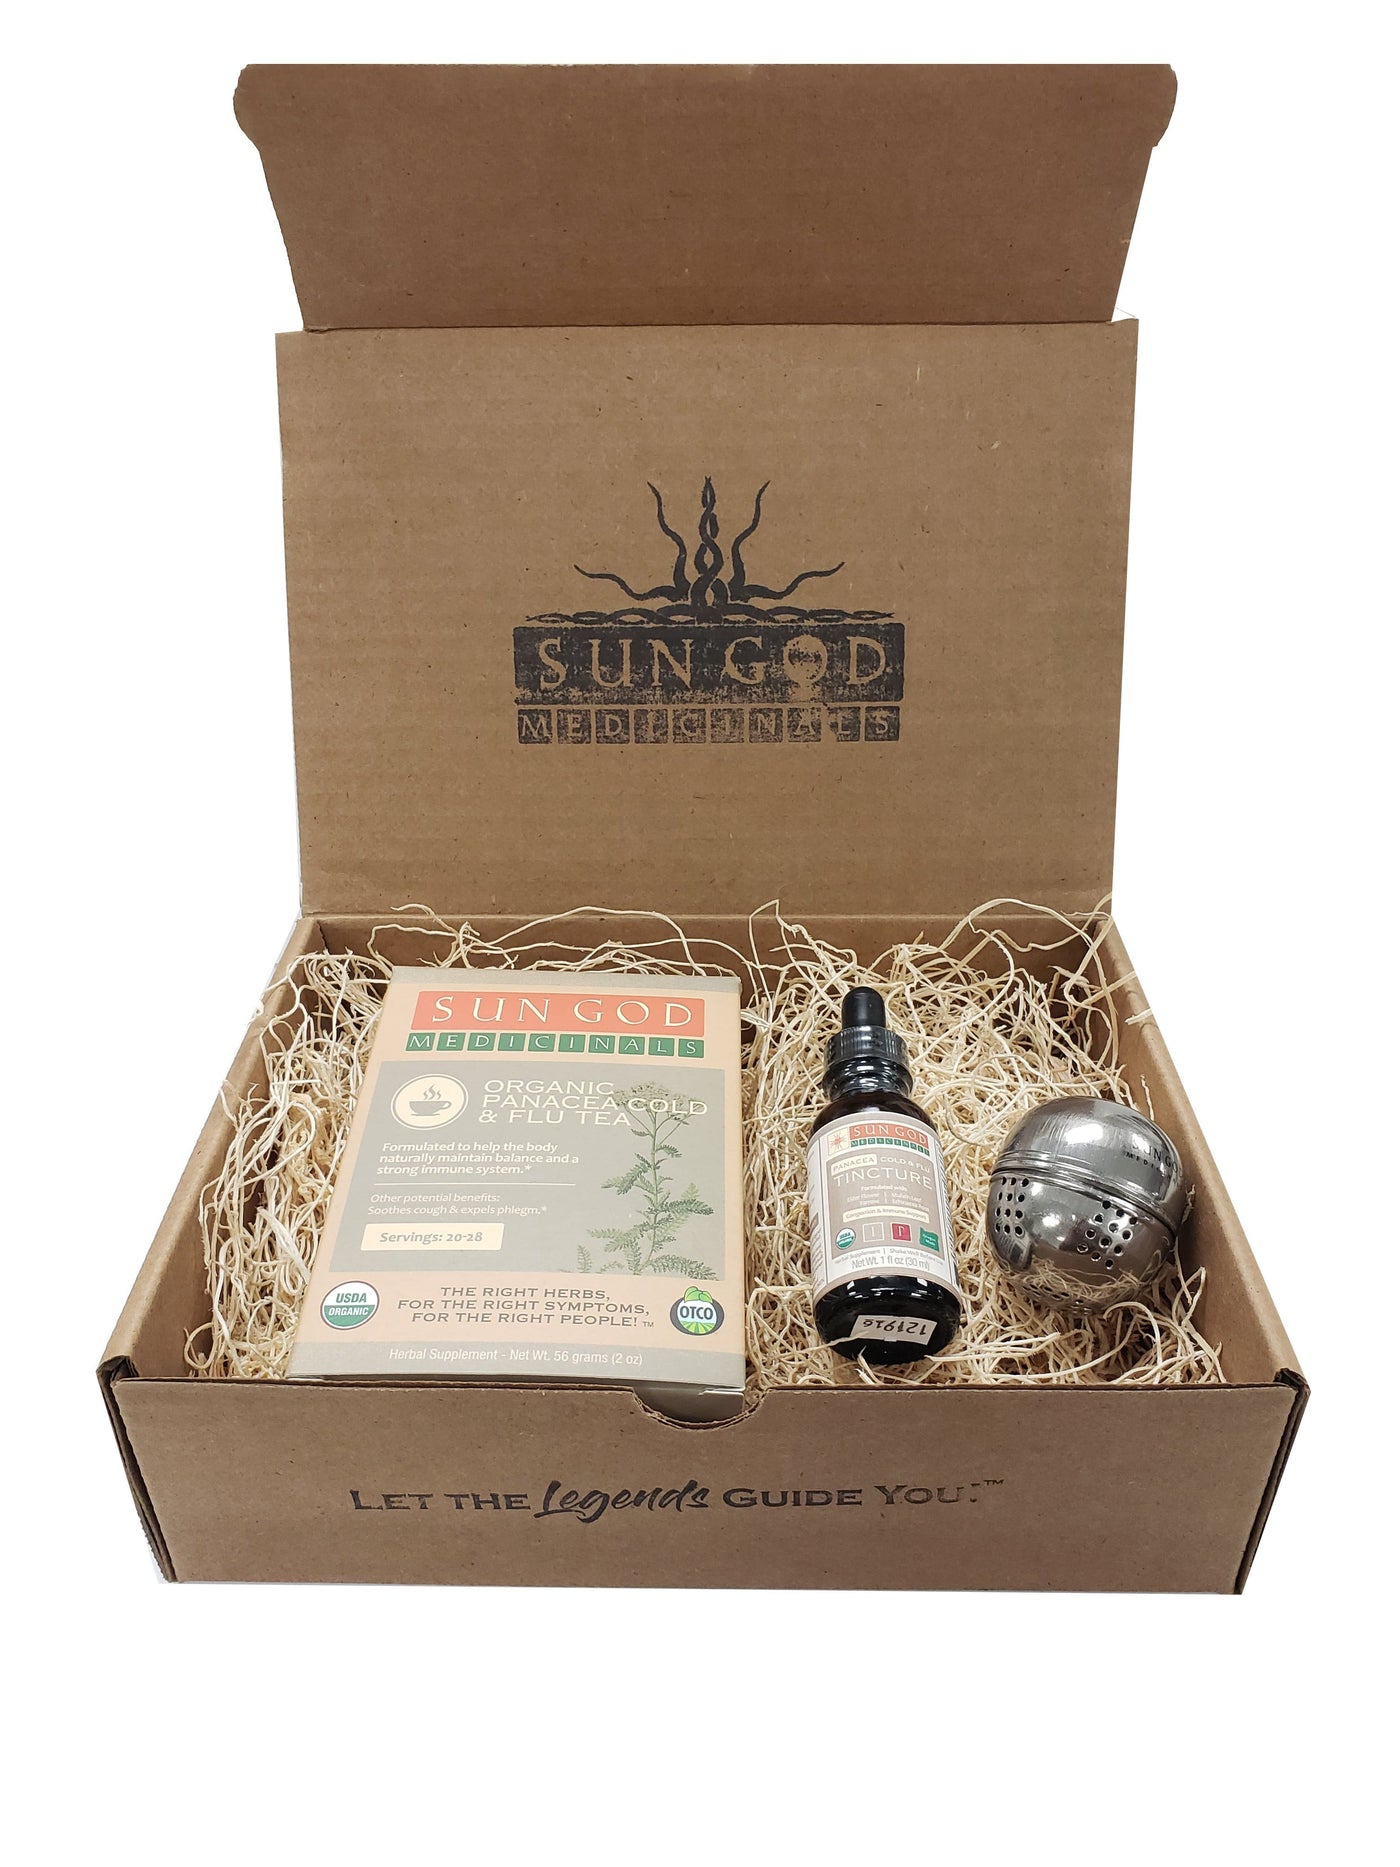 Cold and Flu Support Gift Box - Sun God Medicinals